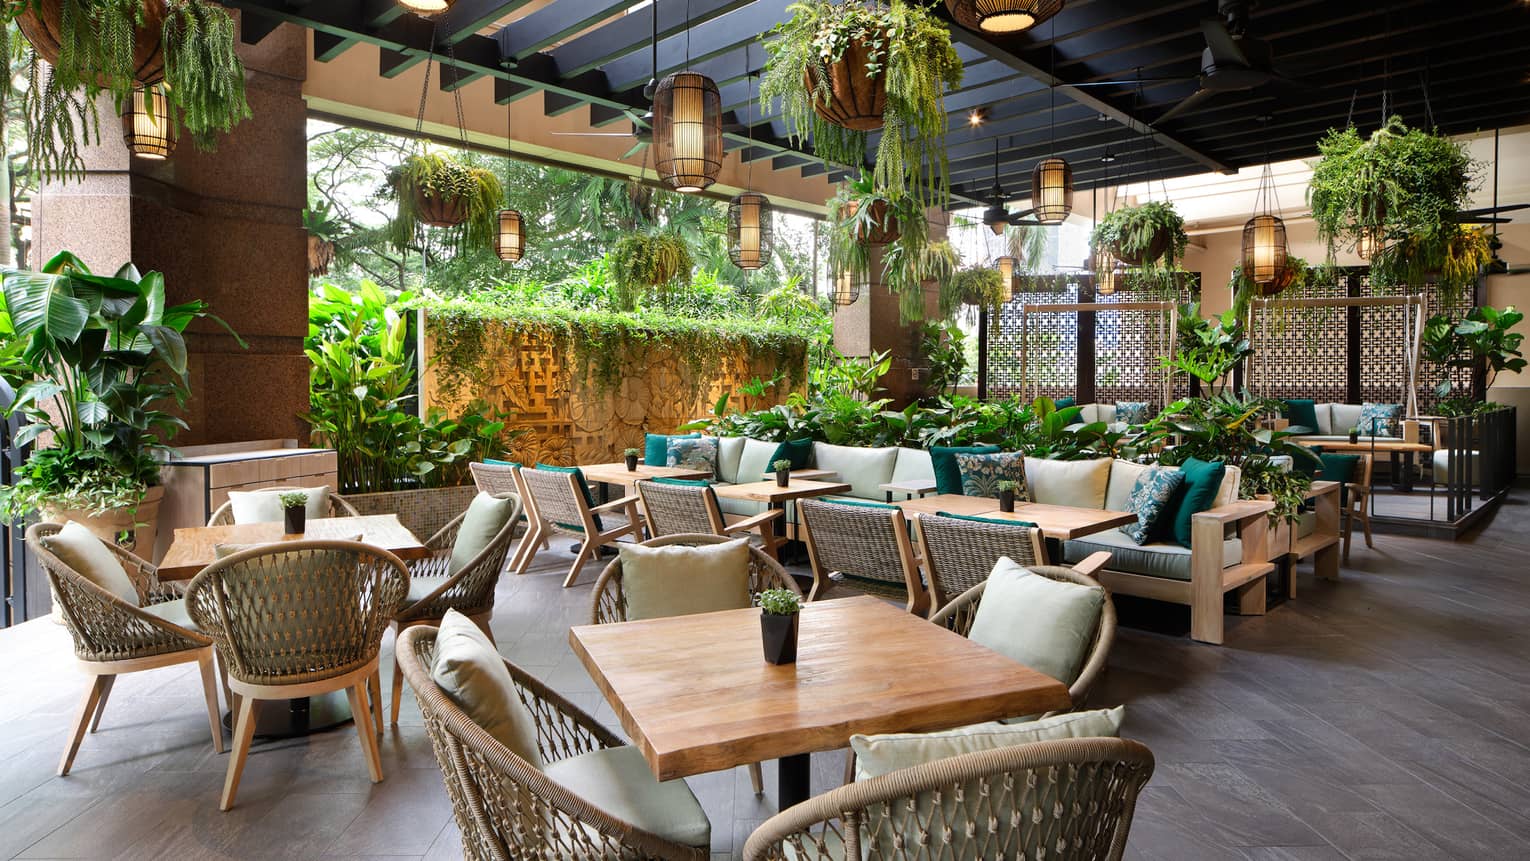 Garden@One-Ninety outdoor lounge with rattan chairs, square tables for four, portico ceiling, hanging plants and lighting